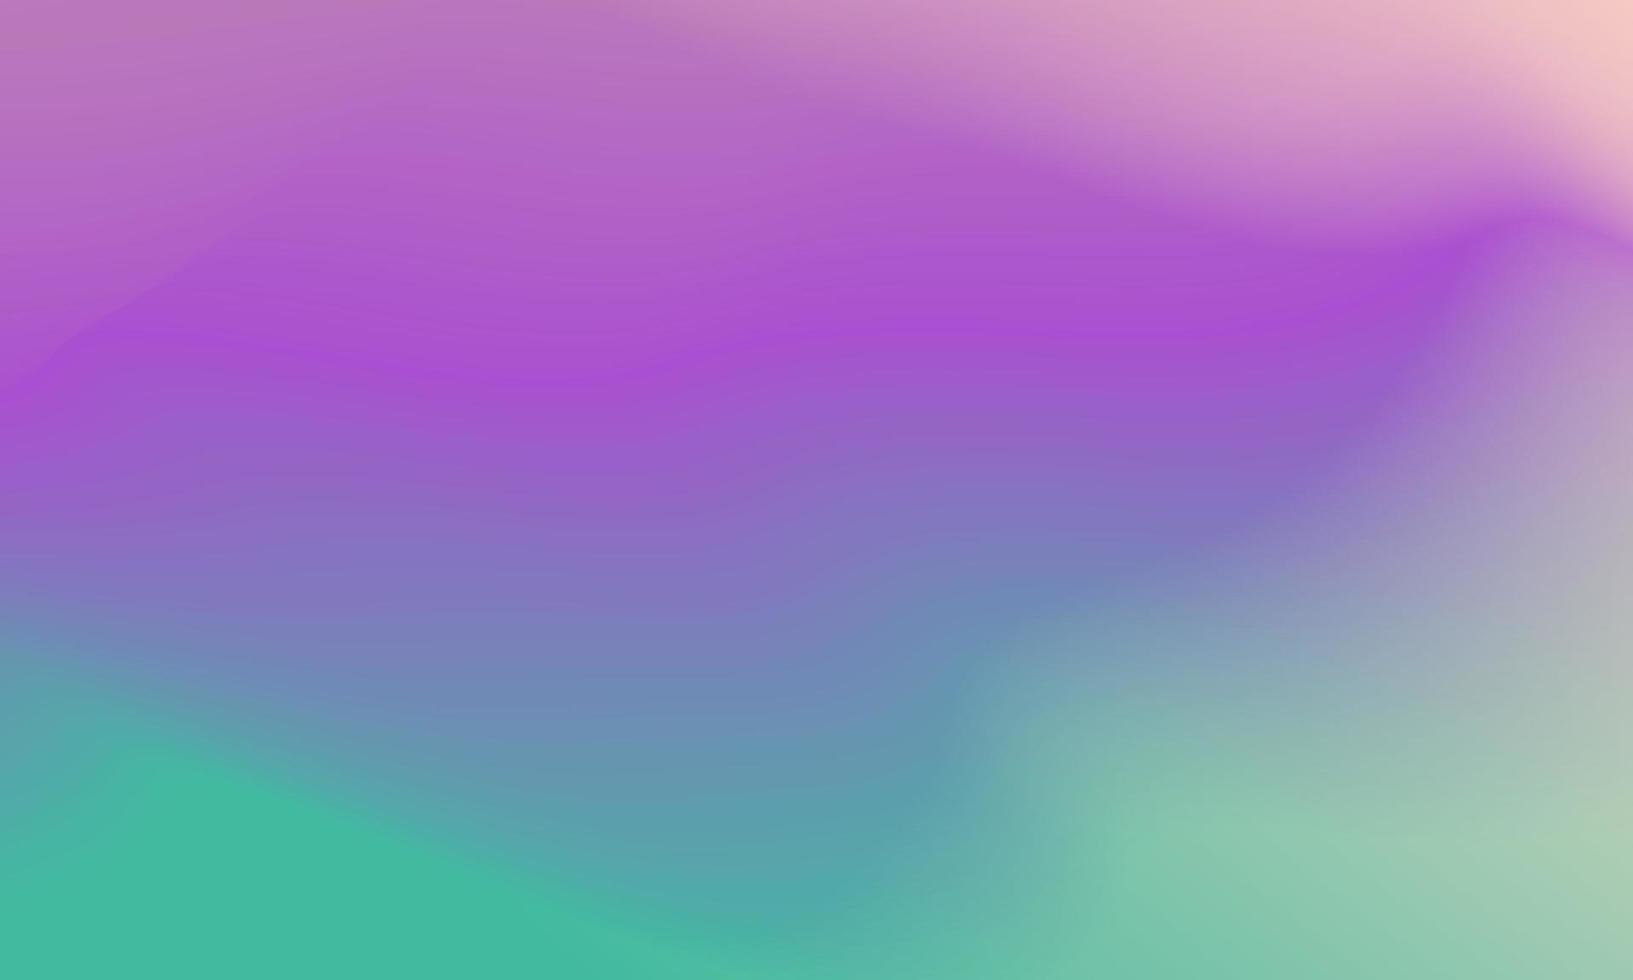 Beautiful purple and green gradient background smooth and soft texture vector